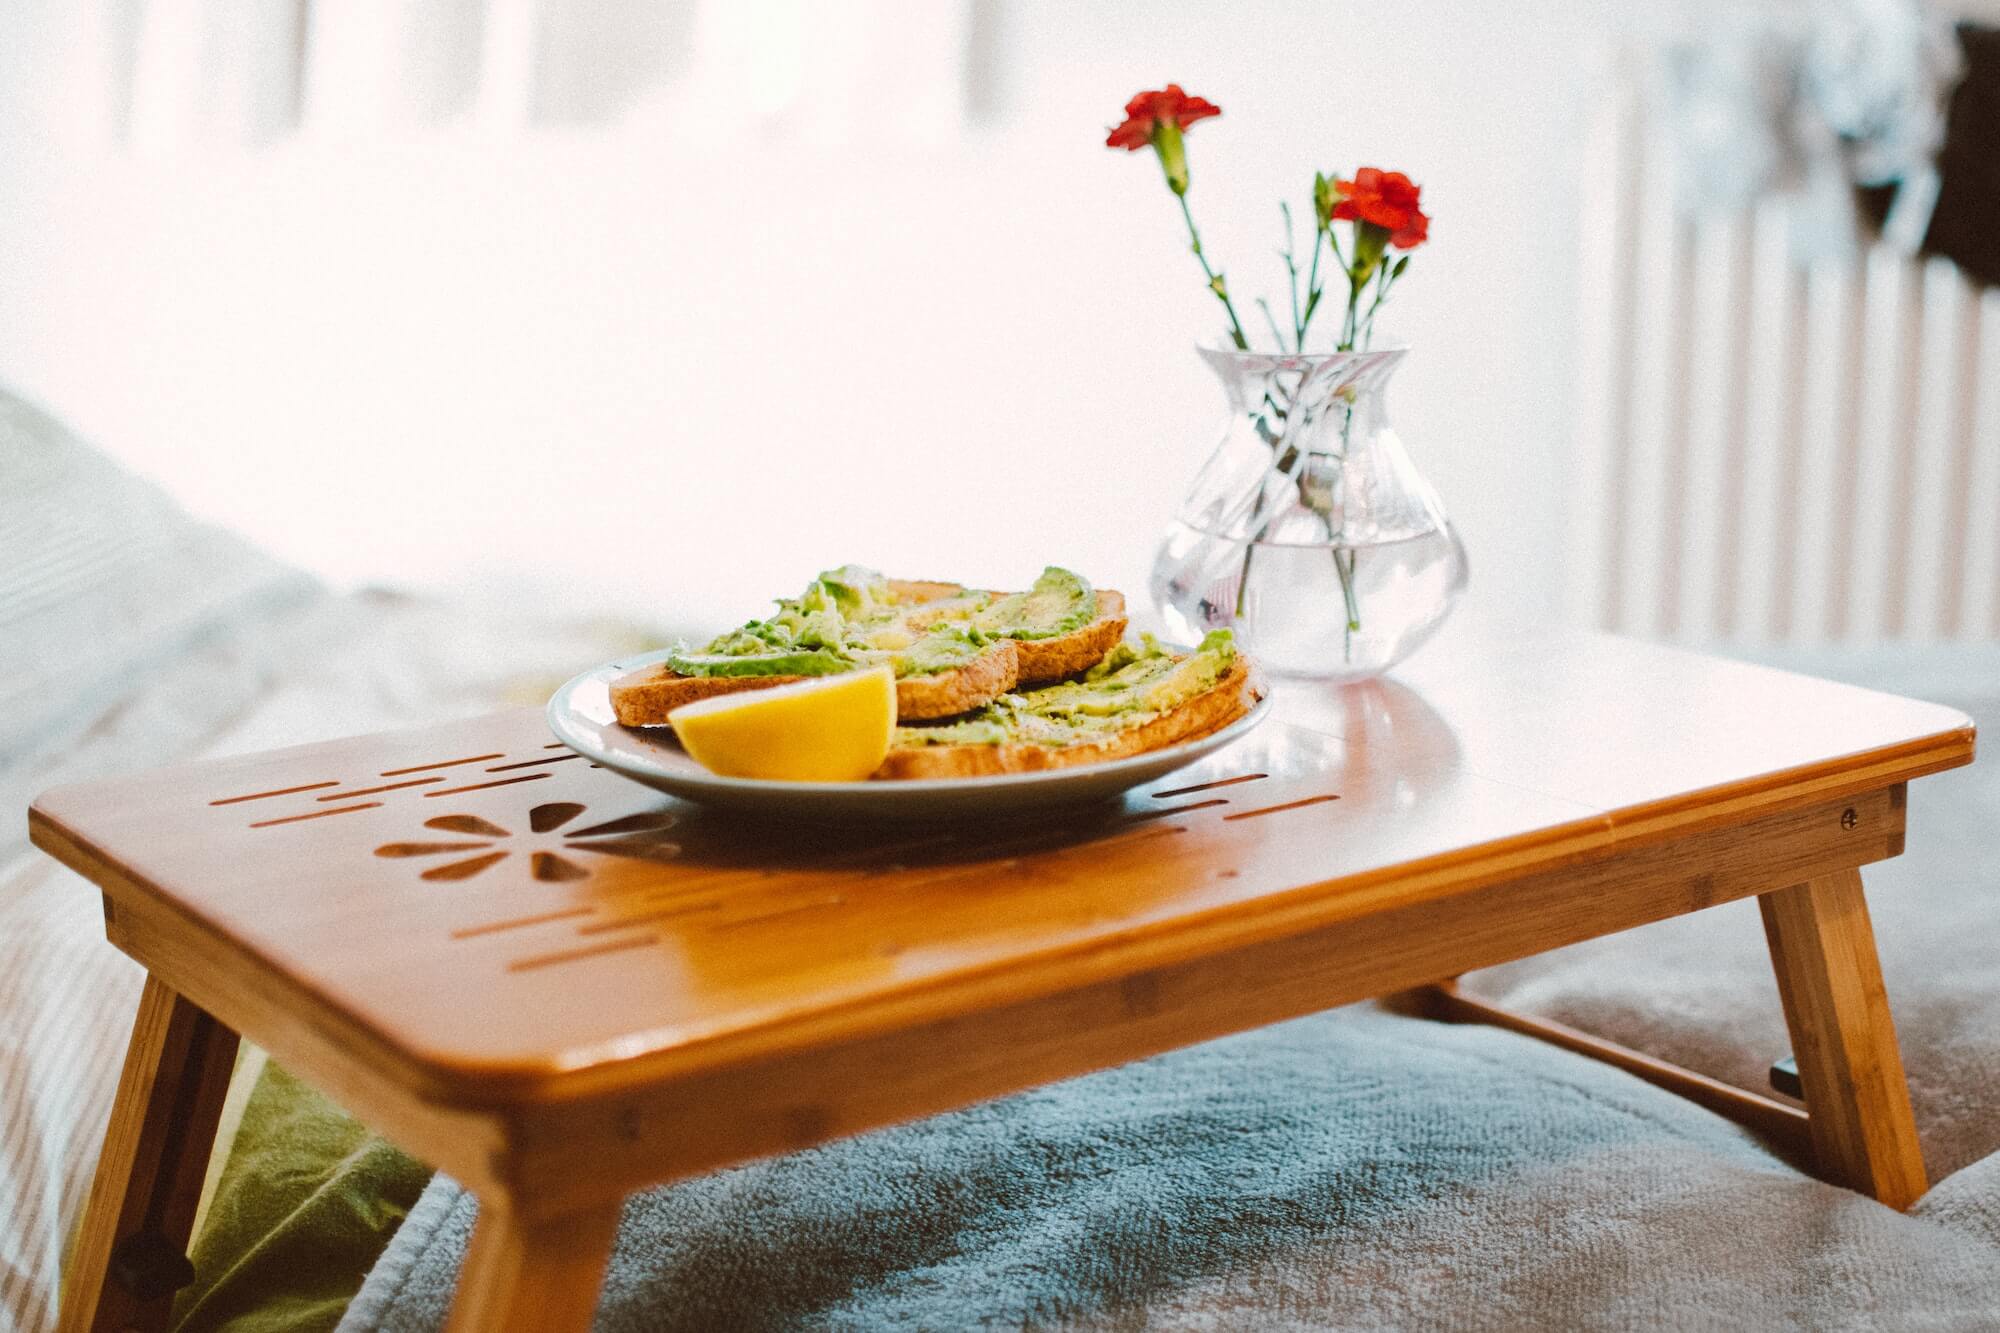 Avocado on toast served on a tray with flowers in a vase atop a bed